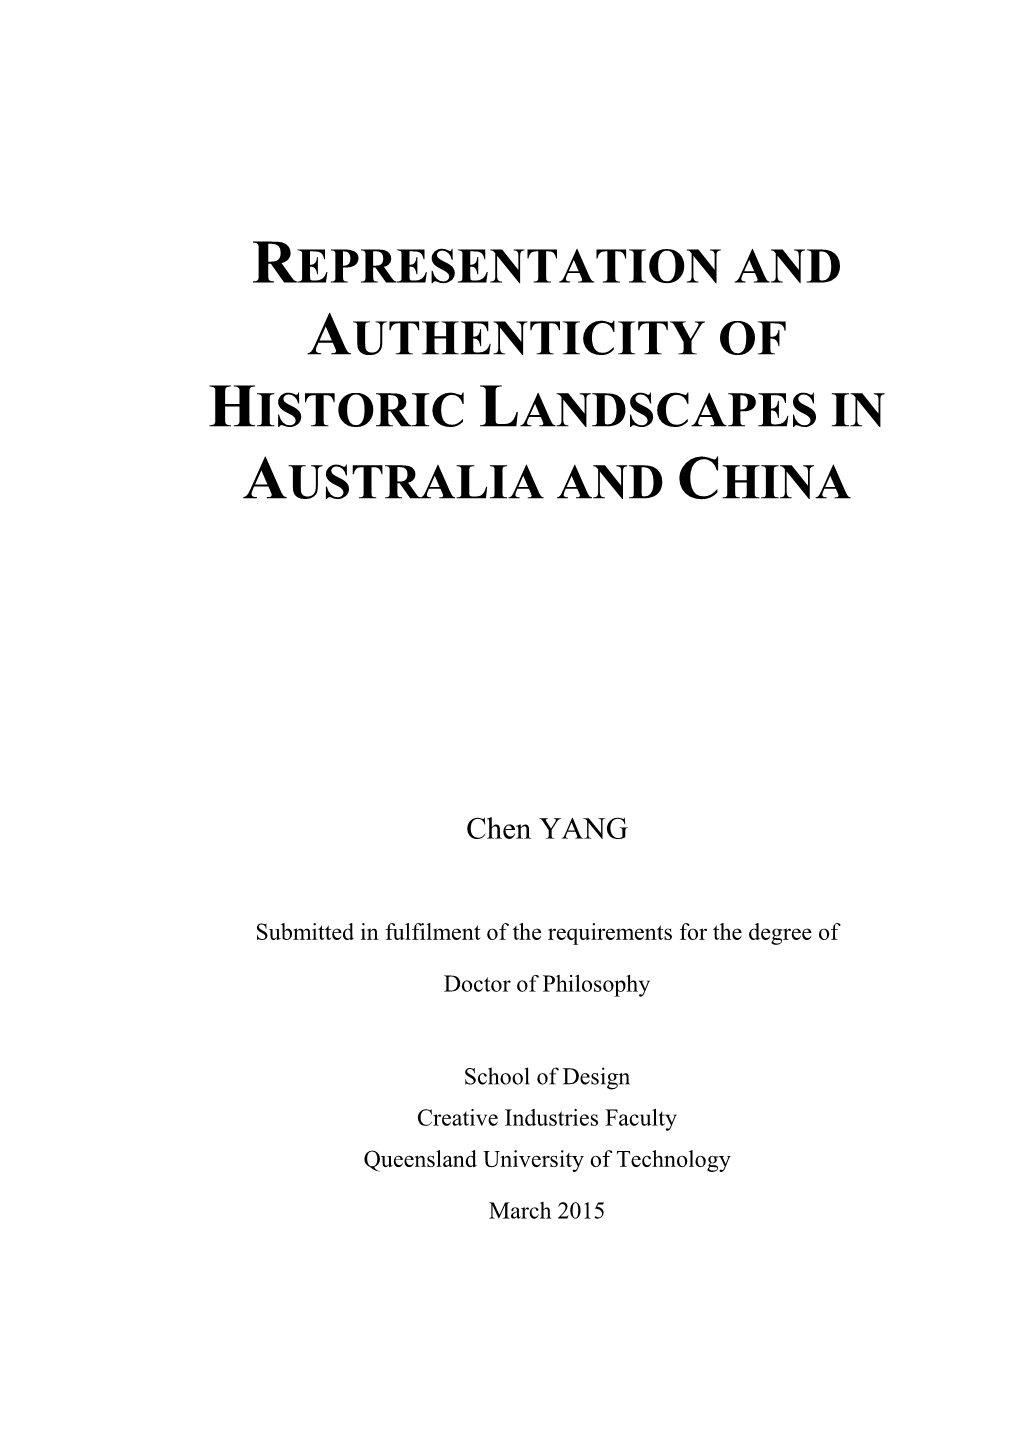 Representation and Authenticity of Historic Landscapes in Australia and China